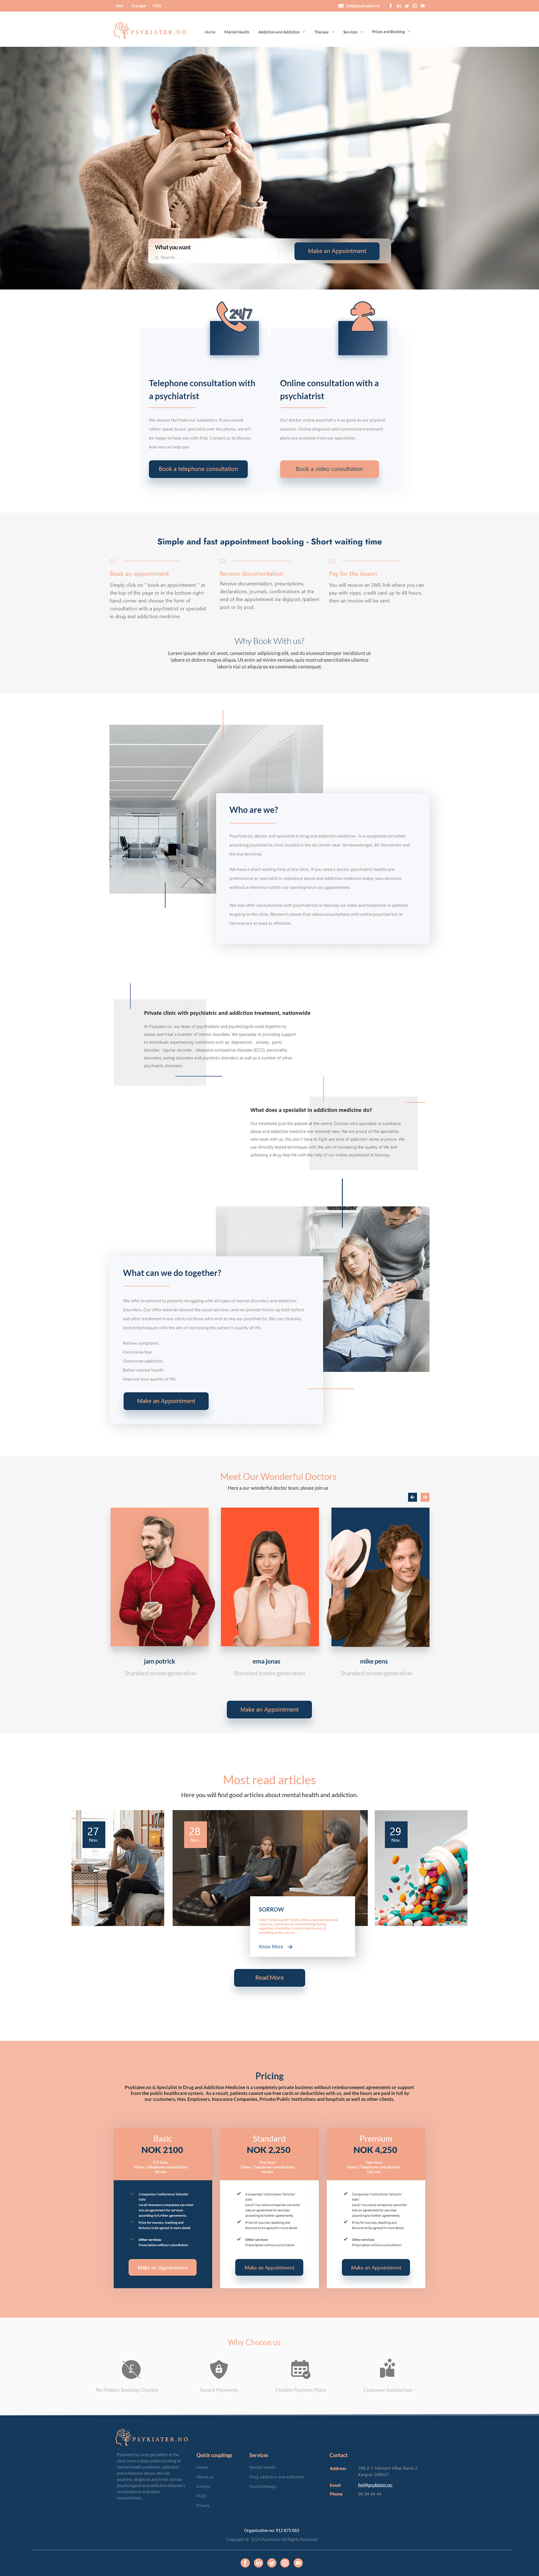 design ui design uiuxdesign UI/UX uidesign psycology counselling Web Design  Website Counselling website